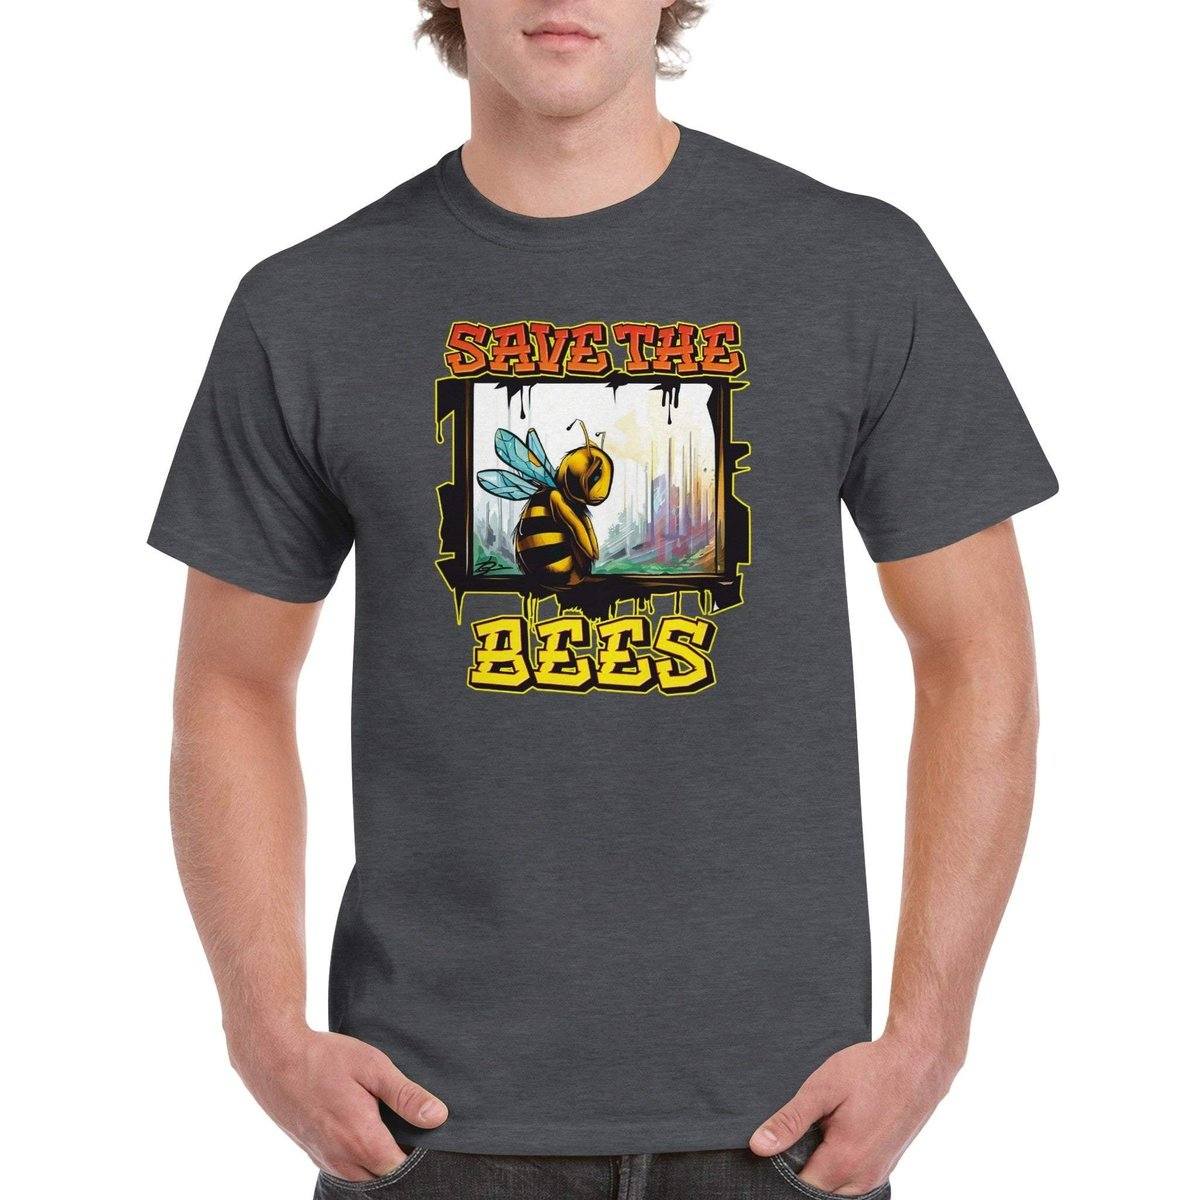 Save The Bees Tshirt - Crying Bee Window - Unisex Crewneck T-shirt Australia Online Color